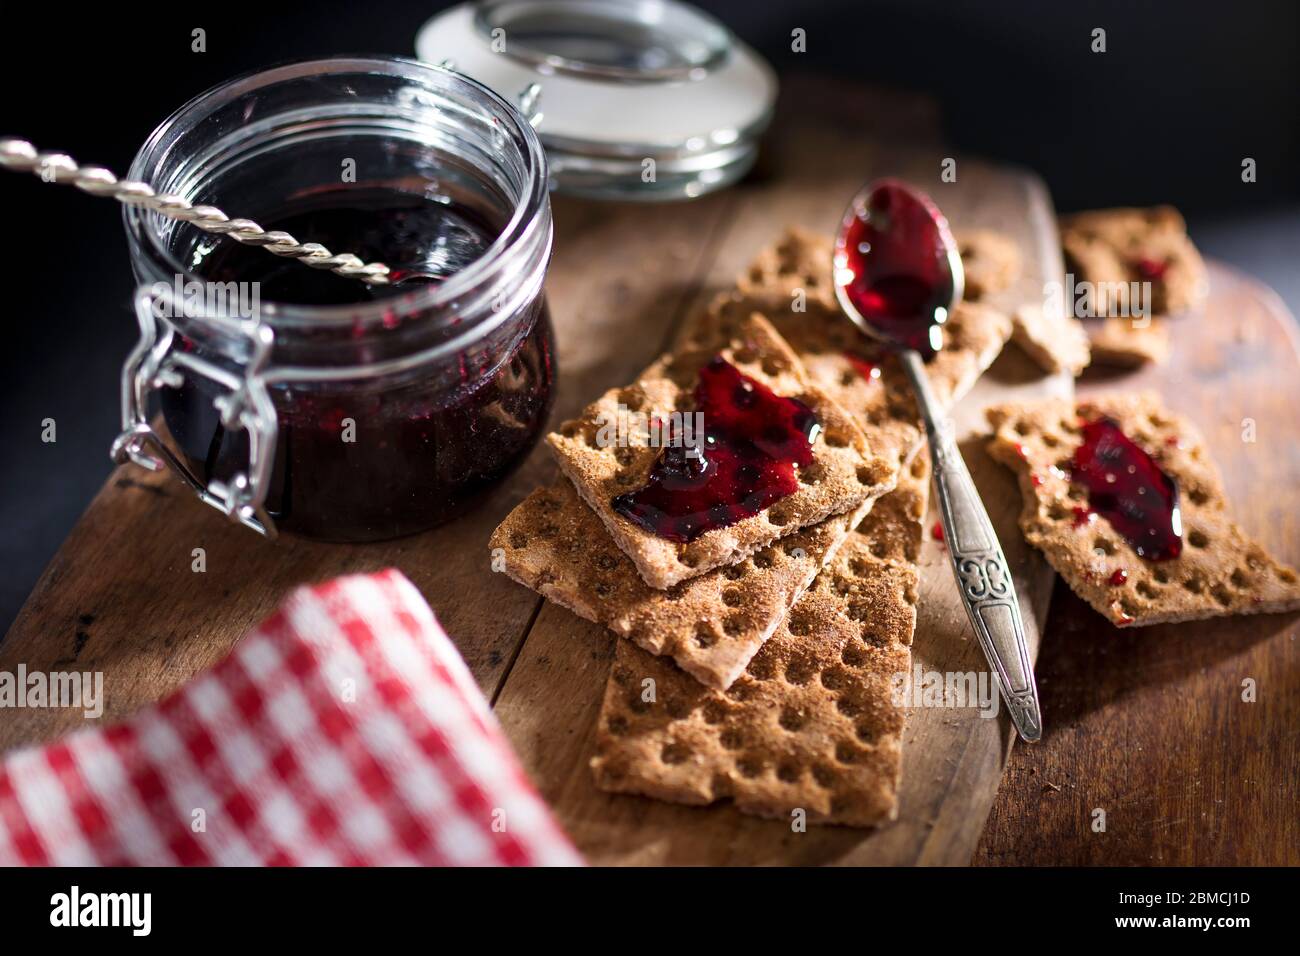 Open jar with blackcurrant jam on a wooden cutting board. Dry biscuits spread with jam, crumbs and a spoon in jam. Space for text. Stock Photo